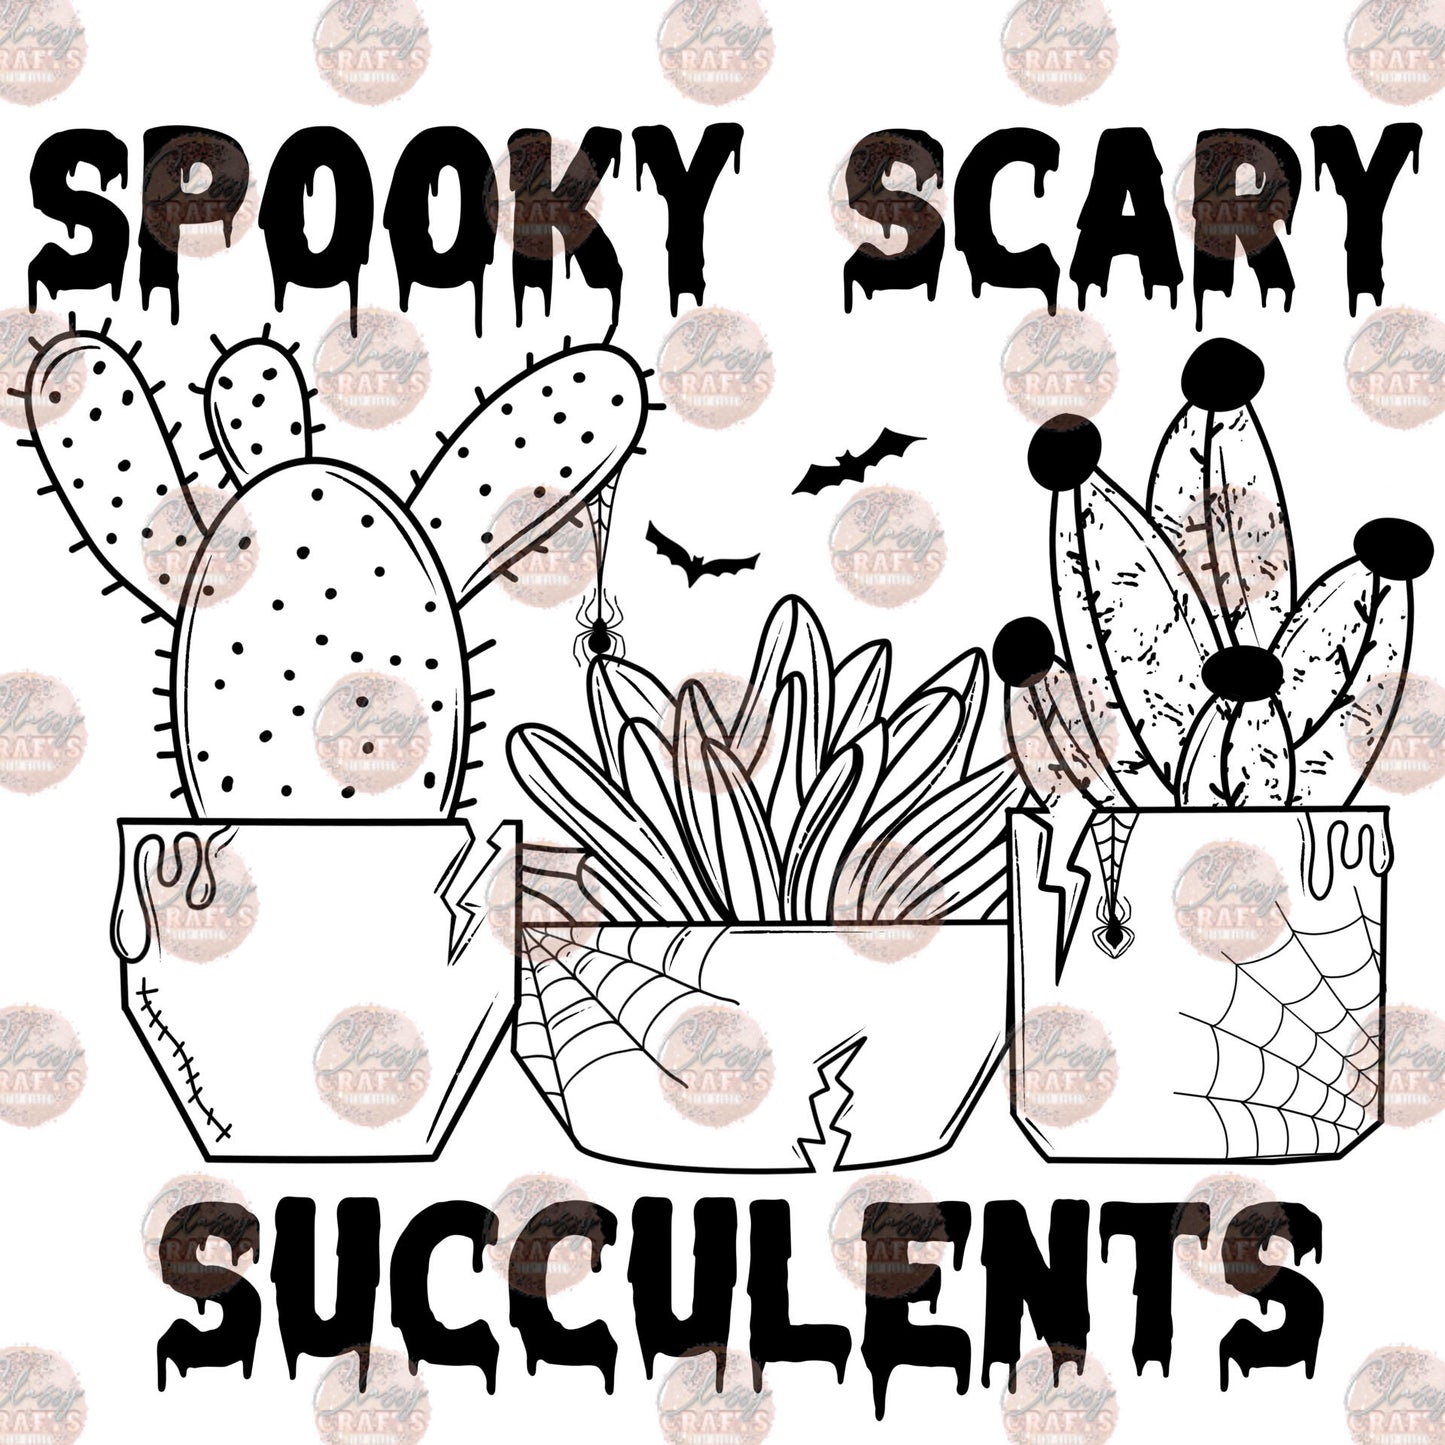 Spooky Scary Succulents - Sublimation Transfer